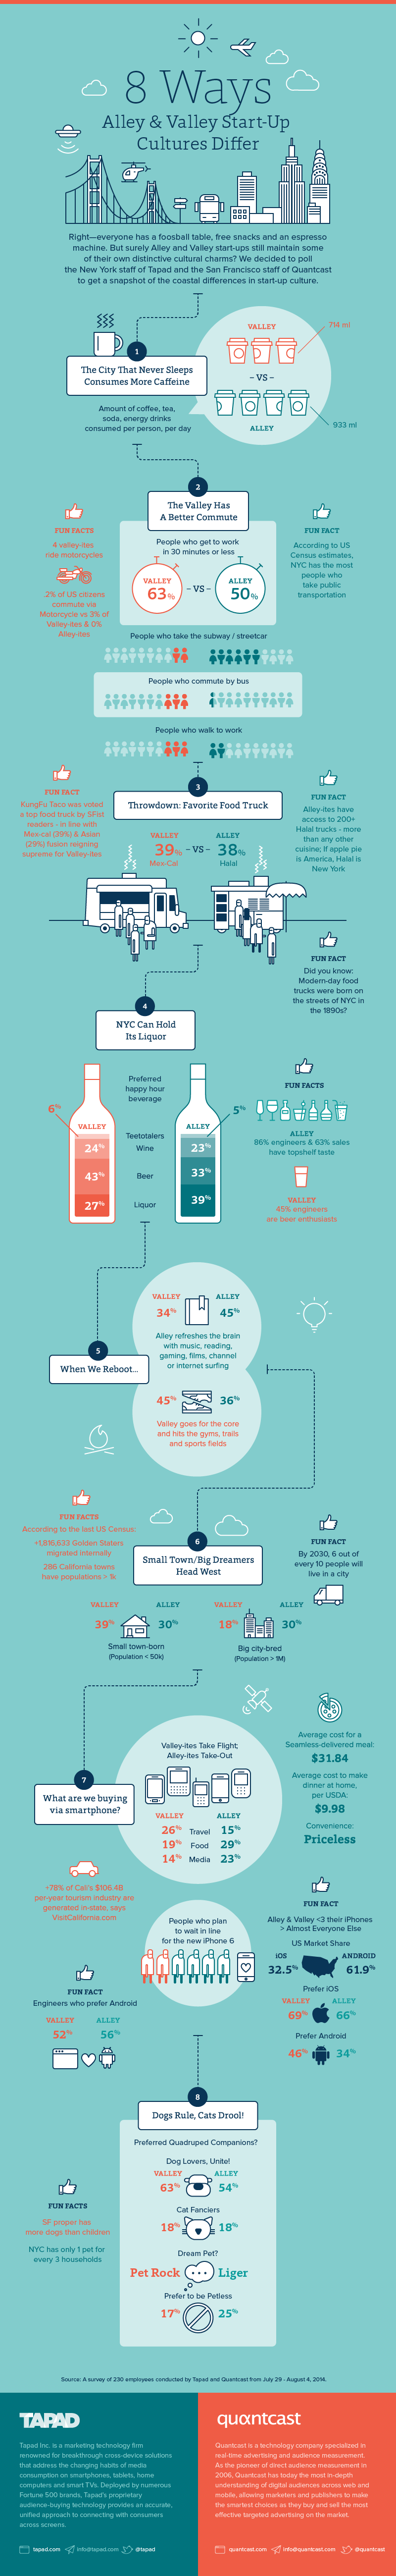 Alley Valley Infographic - Tapad + Quantcast 2014